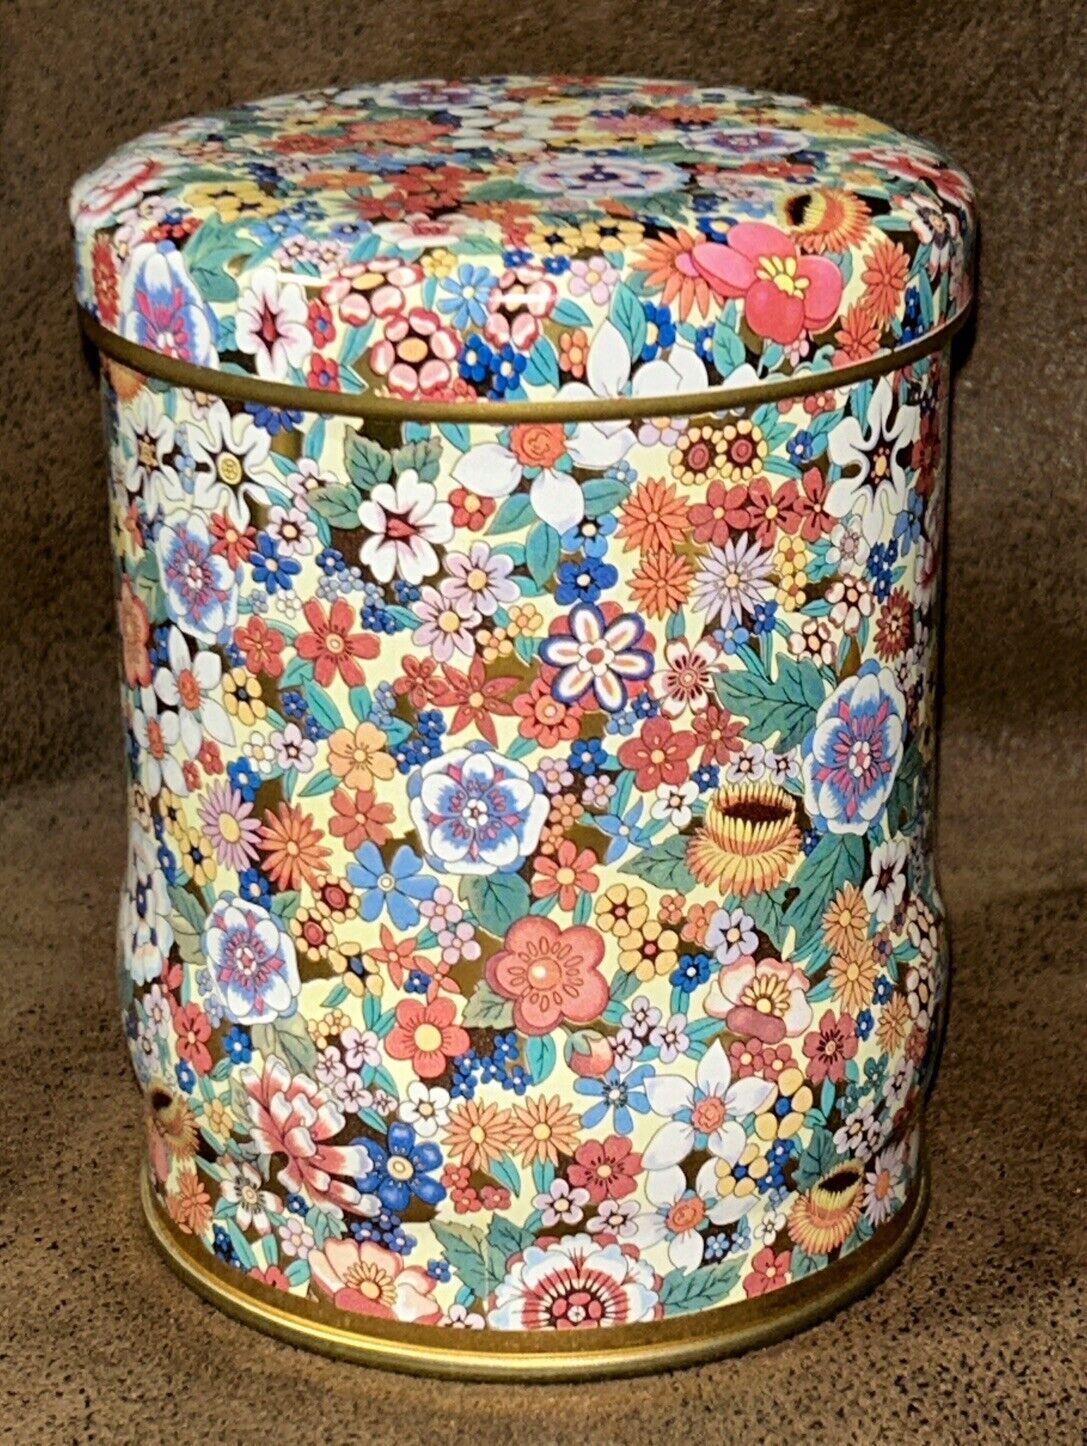 Vintage Daher Tea Biscuit Tin Round Canister Chintz Floral Retro Pattern 5x3.5”